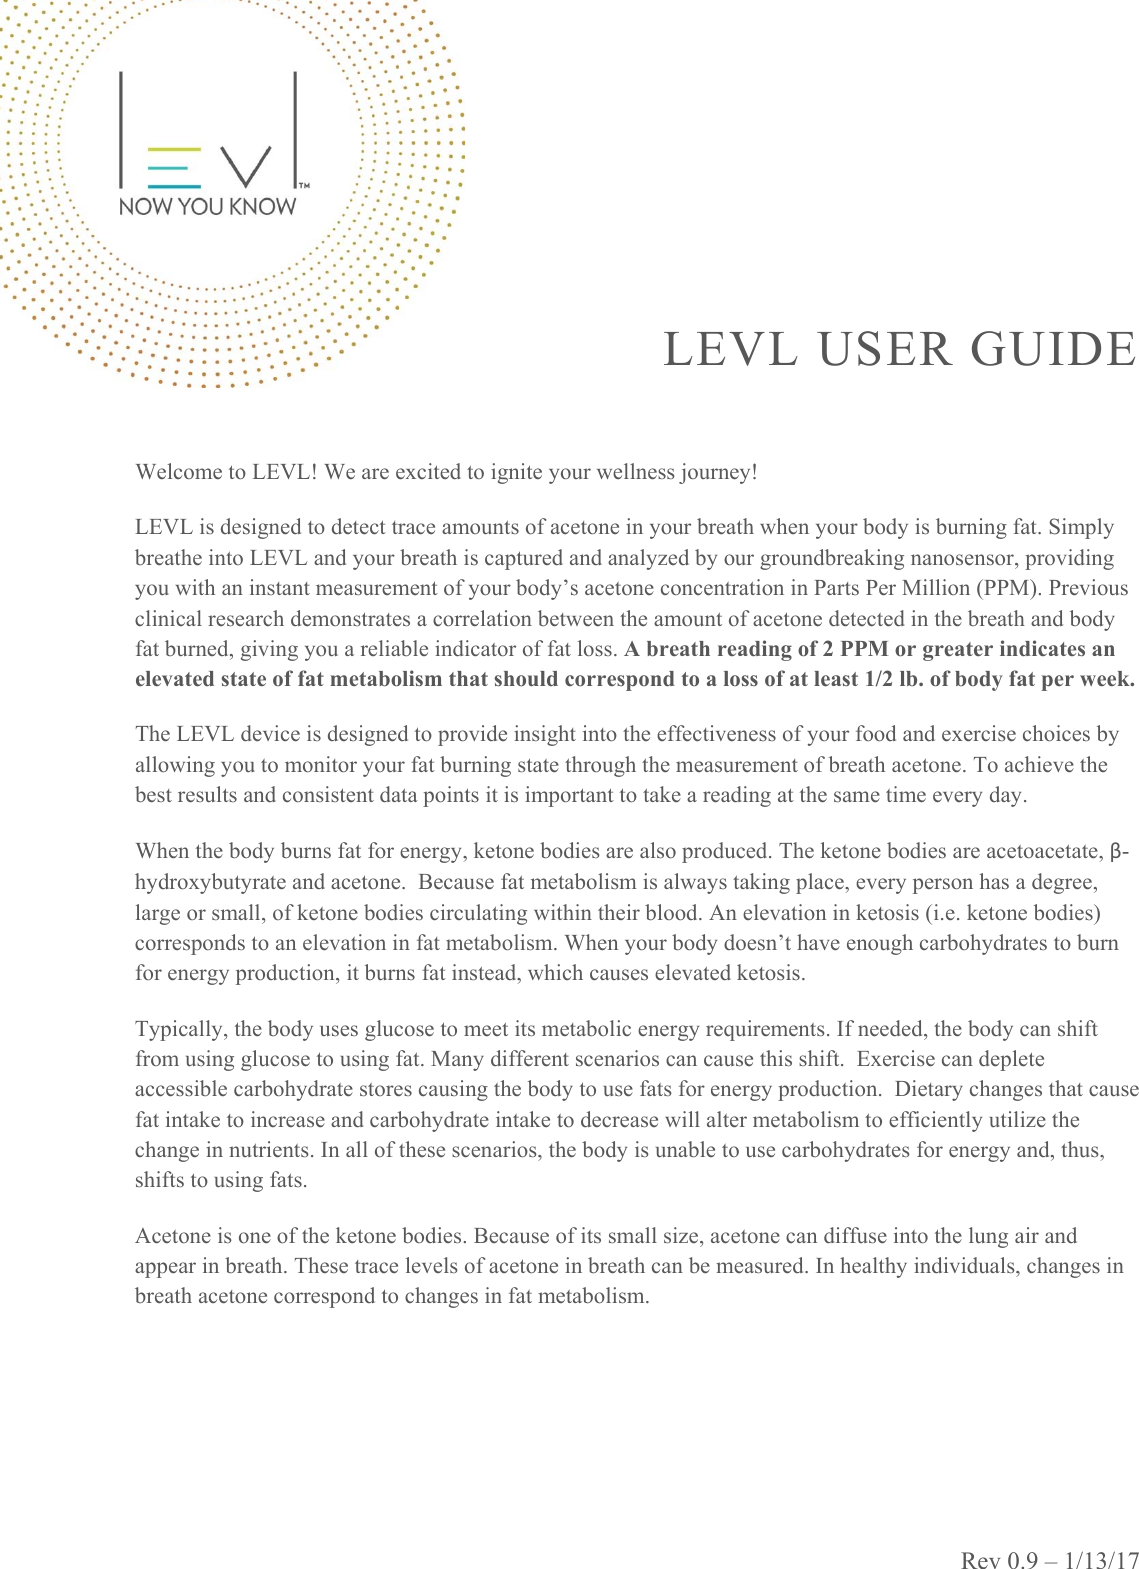 Rev 0.9 – 1/13/17 LEVL USER GUIDE   Welcome to LEVL! We are excited to ignite your wellness journey! LEVL is designed to detect trace amounts of acetone in your breath when your body is burning fat. Simply breathe into LEVL and your breath is captured and analyzed by our groundbreaking nanosensor, providing you with an instant measurement of your body’s acetone concentration in Parts Per Million (PPM). Previous clinical research demonstrates a correlation between the amount of acetone detected in the breath and body fat burned, giving you a reliable indicator of fat loss. A breath reading of 2 PPM or greater indicates an elevated state of fat metabolism that should correspond to a loss of at least 1/2 lb. of body fat per week. The LEVL device is designed to provide insight into the effectiveness of your food and exercise choices by allowing you to monitor your fat burning state through the measurement of breath acetone. To achieve the best results and consistent data points it is important to take a reading at the same time every day. When the body burns fat for energy, ketone bodies are also produced. The ketone bodies are acetoacetate, β-hydroxybutyrate and acetone.  Because fat metabolism is always taking place, every person has a degree, large or small, of ketone bodies circulating within their blood. An elevation in ketosis (i.e. ketone bodies) corresponds to an elevation in fat metabolism. When your body doesn’t have enough carbohydrates to burn for energy production, it burns fat instead, which causes elevated ketosis. Typically, the body uses glucose to meet its metabolic energy requirements. If needed, the body can shift from using glucose to using fat. Many different scenarios can cause this shift.  Exercise can deplete accessible carbohydrate stores causing the body to use fats for energy production.  Dietary changes that cause fat intake to increase and carbohydrate intake to decrease will alter metabolism to efficiently utilize the change in nutrients. In all of these scenarios, the body is unable to use carbohydrates for energy and, thus, shifts to using fats.  Acetone is one of the ketone bodies. Because of its small size, acetone can diffuse into the lung air and appear in breath. These trace levels of acetone in breath can be measured. In healthy individuals, changes in breath acetone correspond to changes in fat metabolism.   